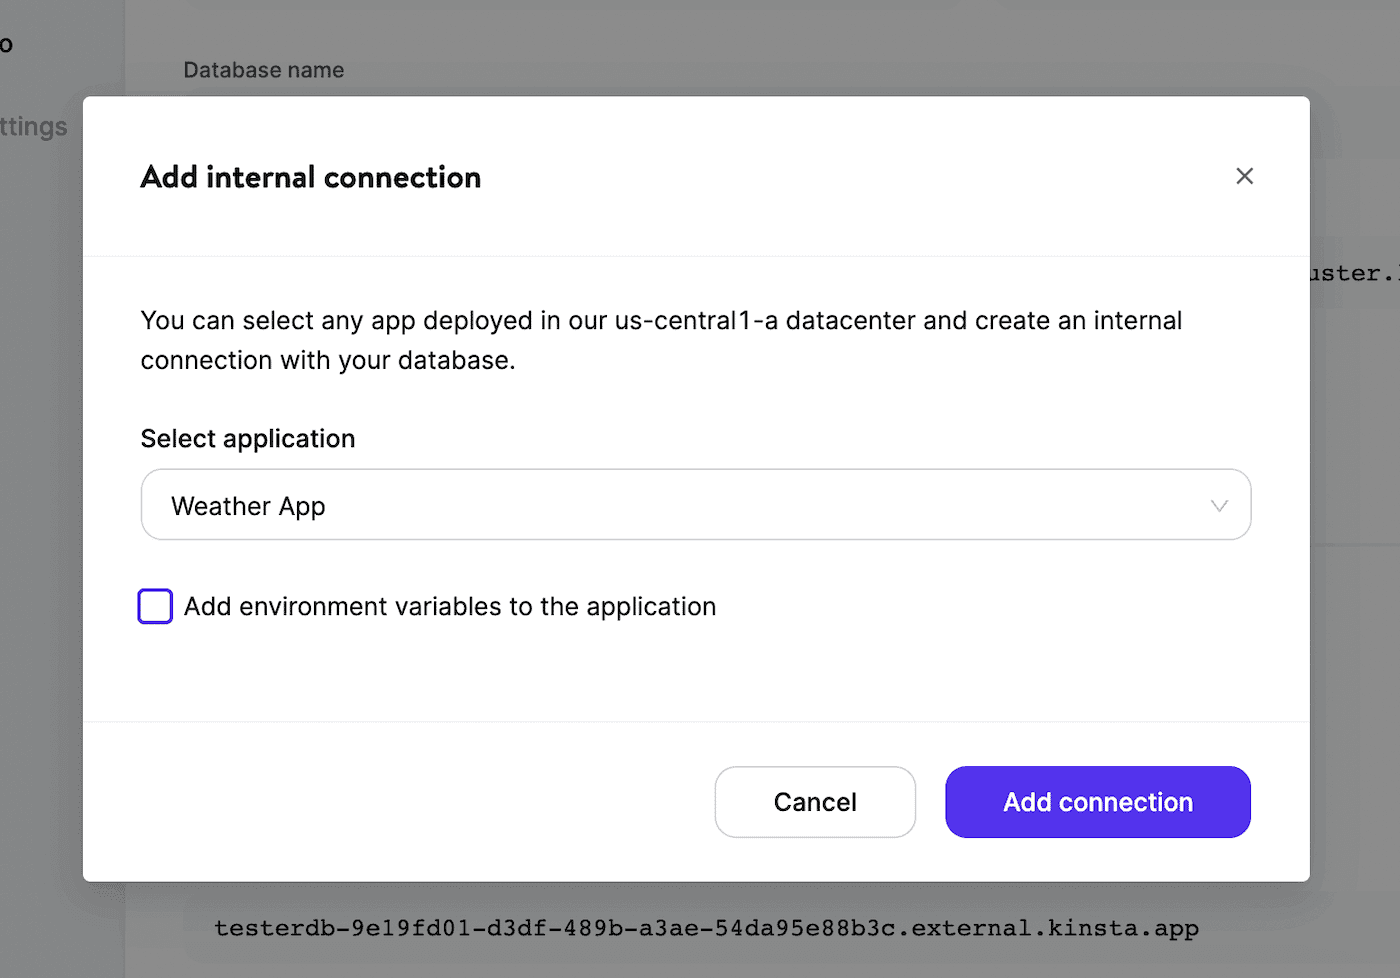 Add an internal connection from a database to an application in MyKinsta.